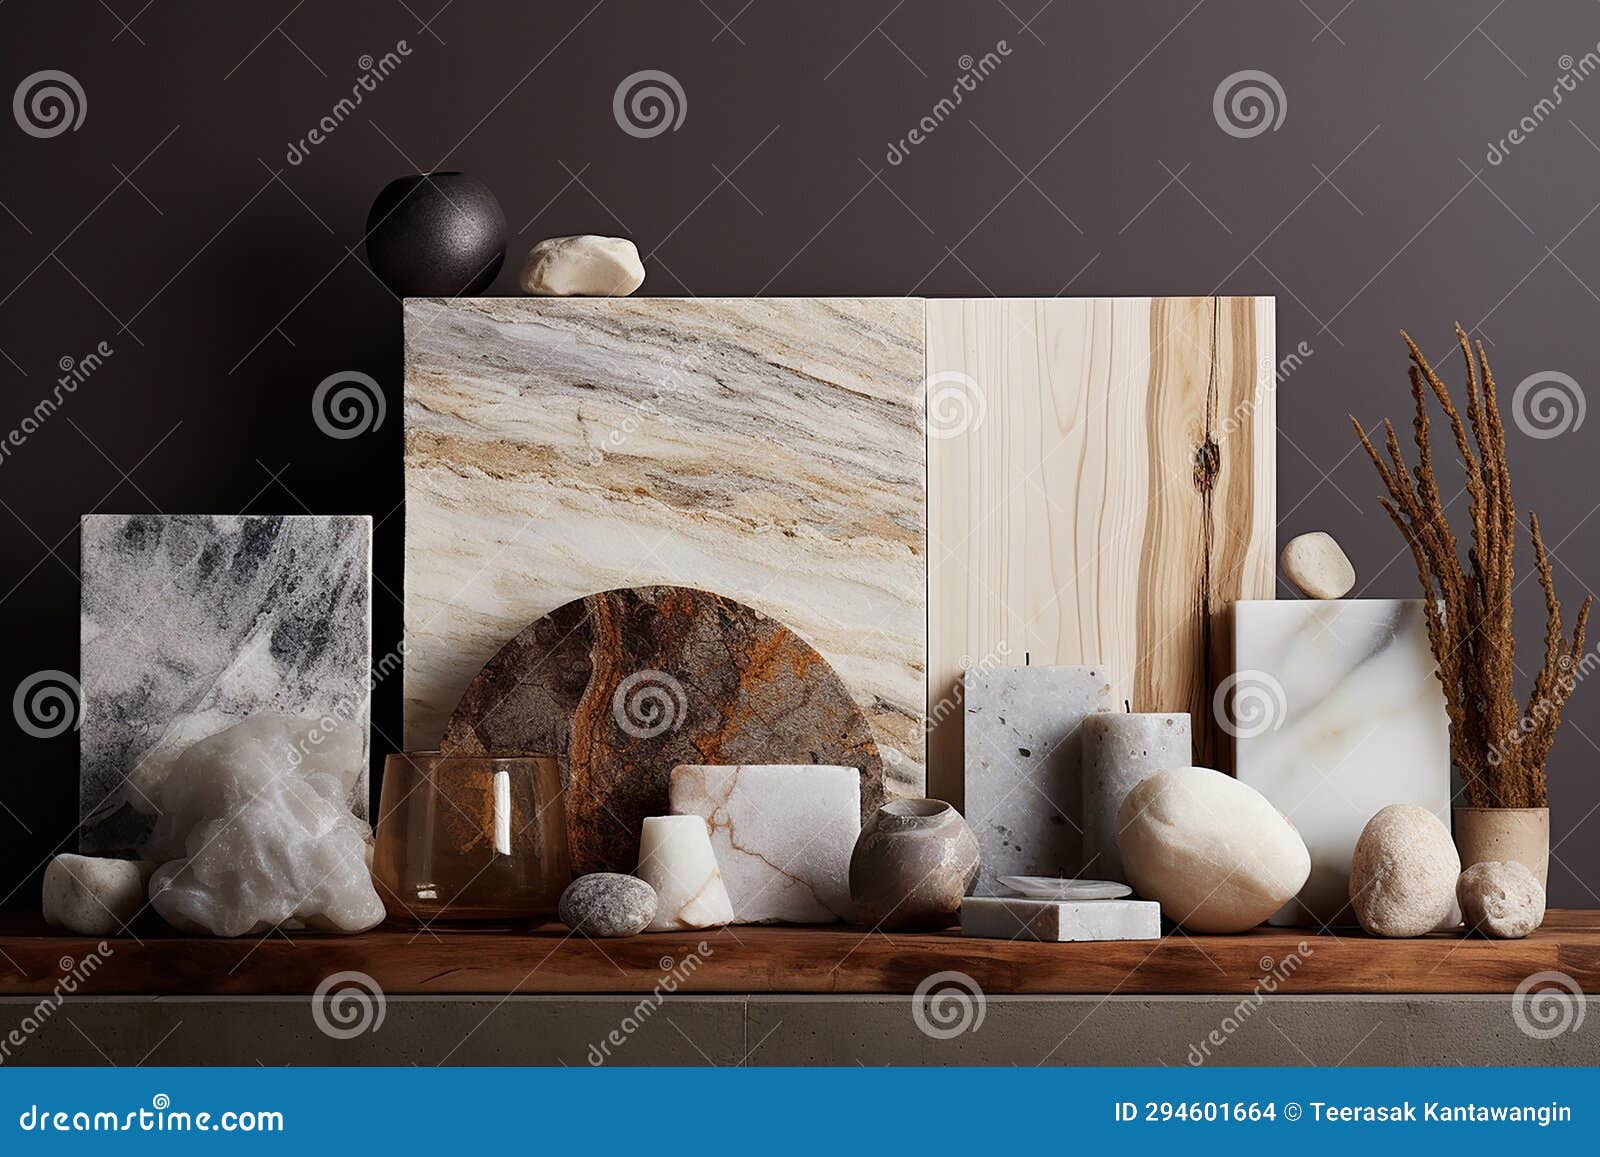 https://thumbs.dreamstime.com/z/textures-mimic-natural-elements-like-marble-wood-stone-earthy-touch-background-textures-mimic-natural-294601664.jpg